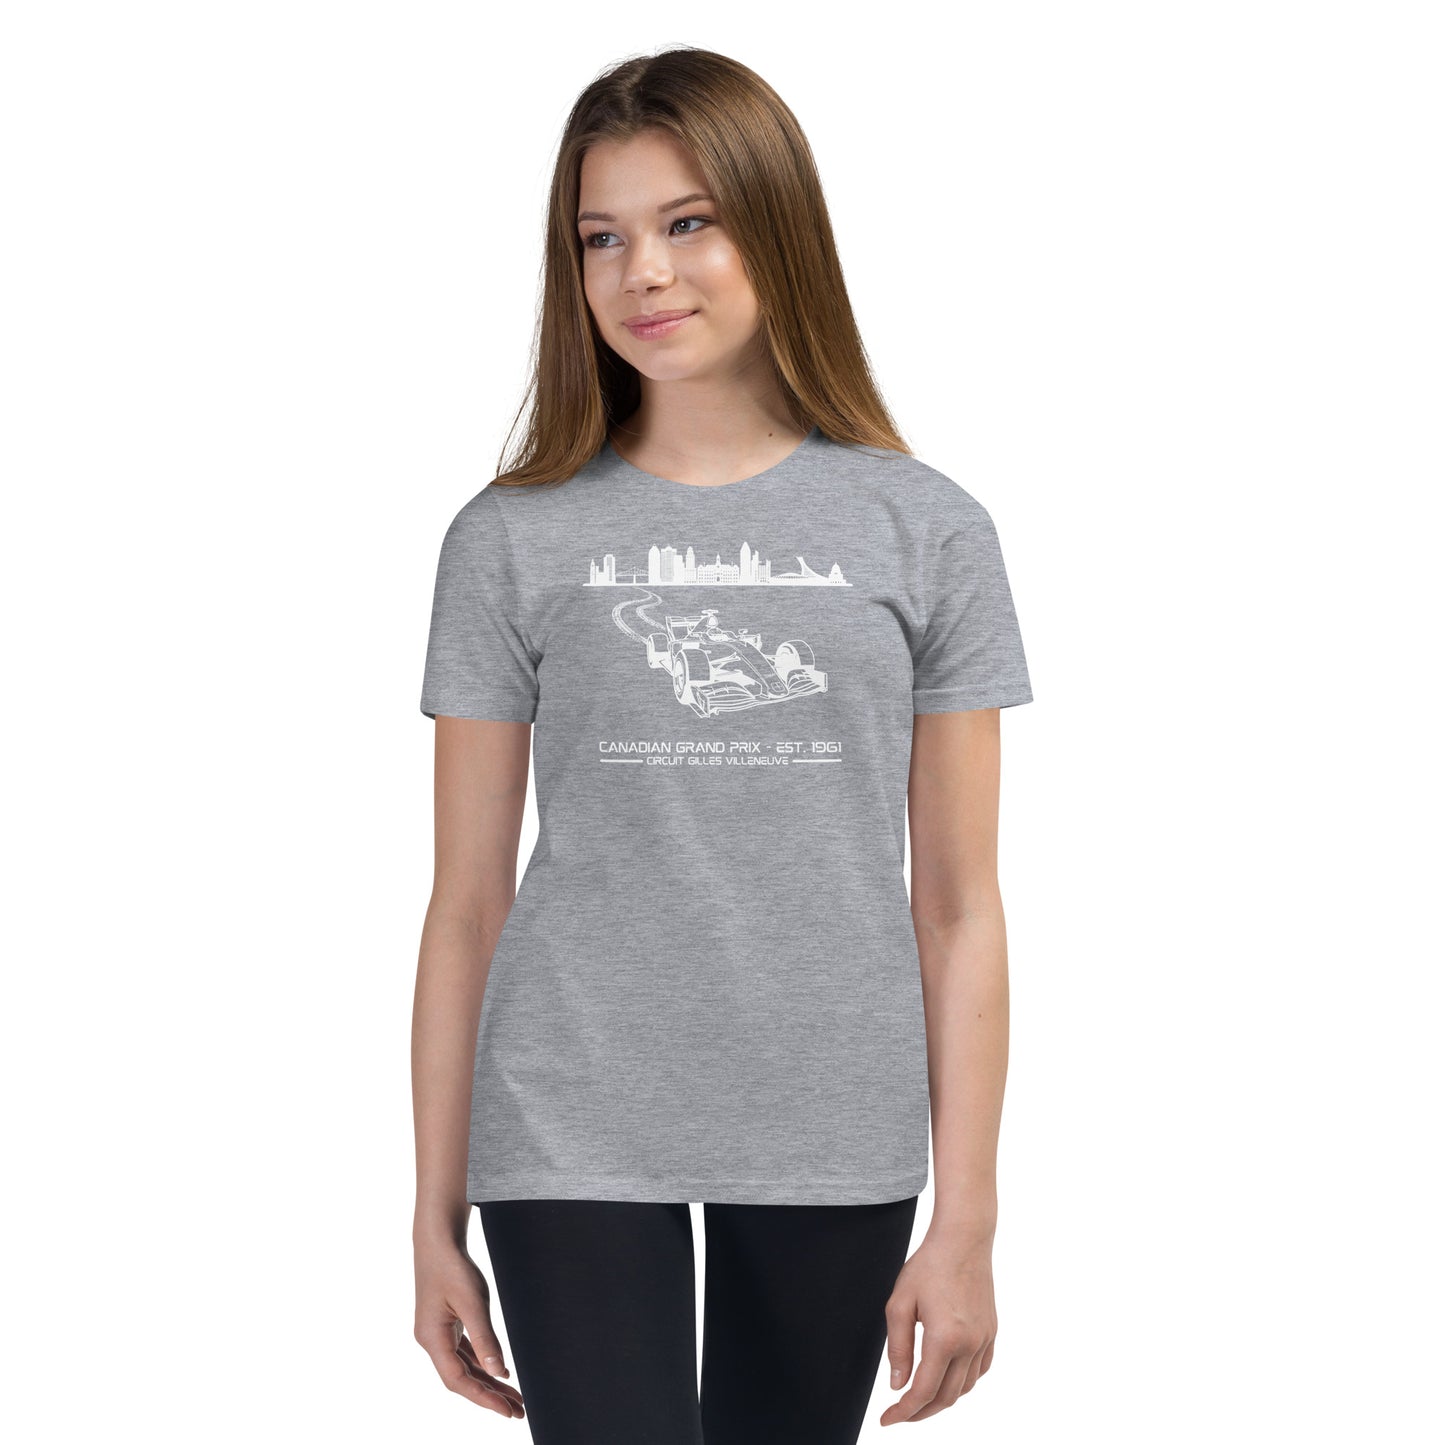 Canadian Grand Prix Youth Tee